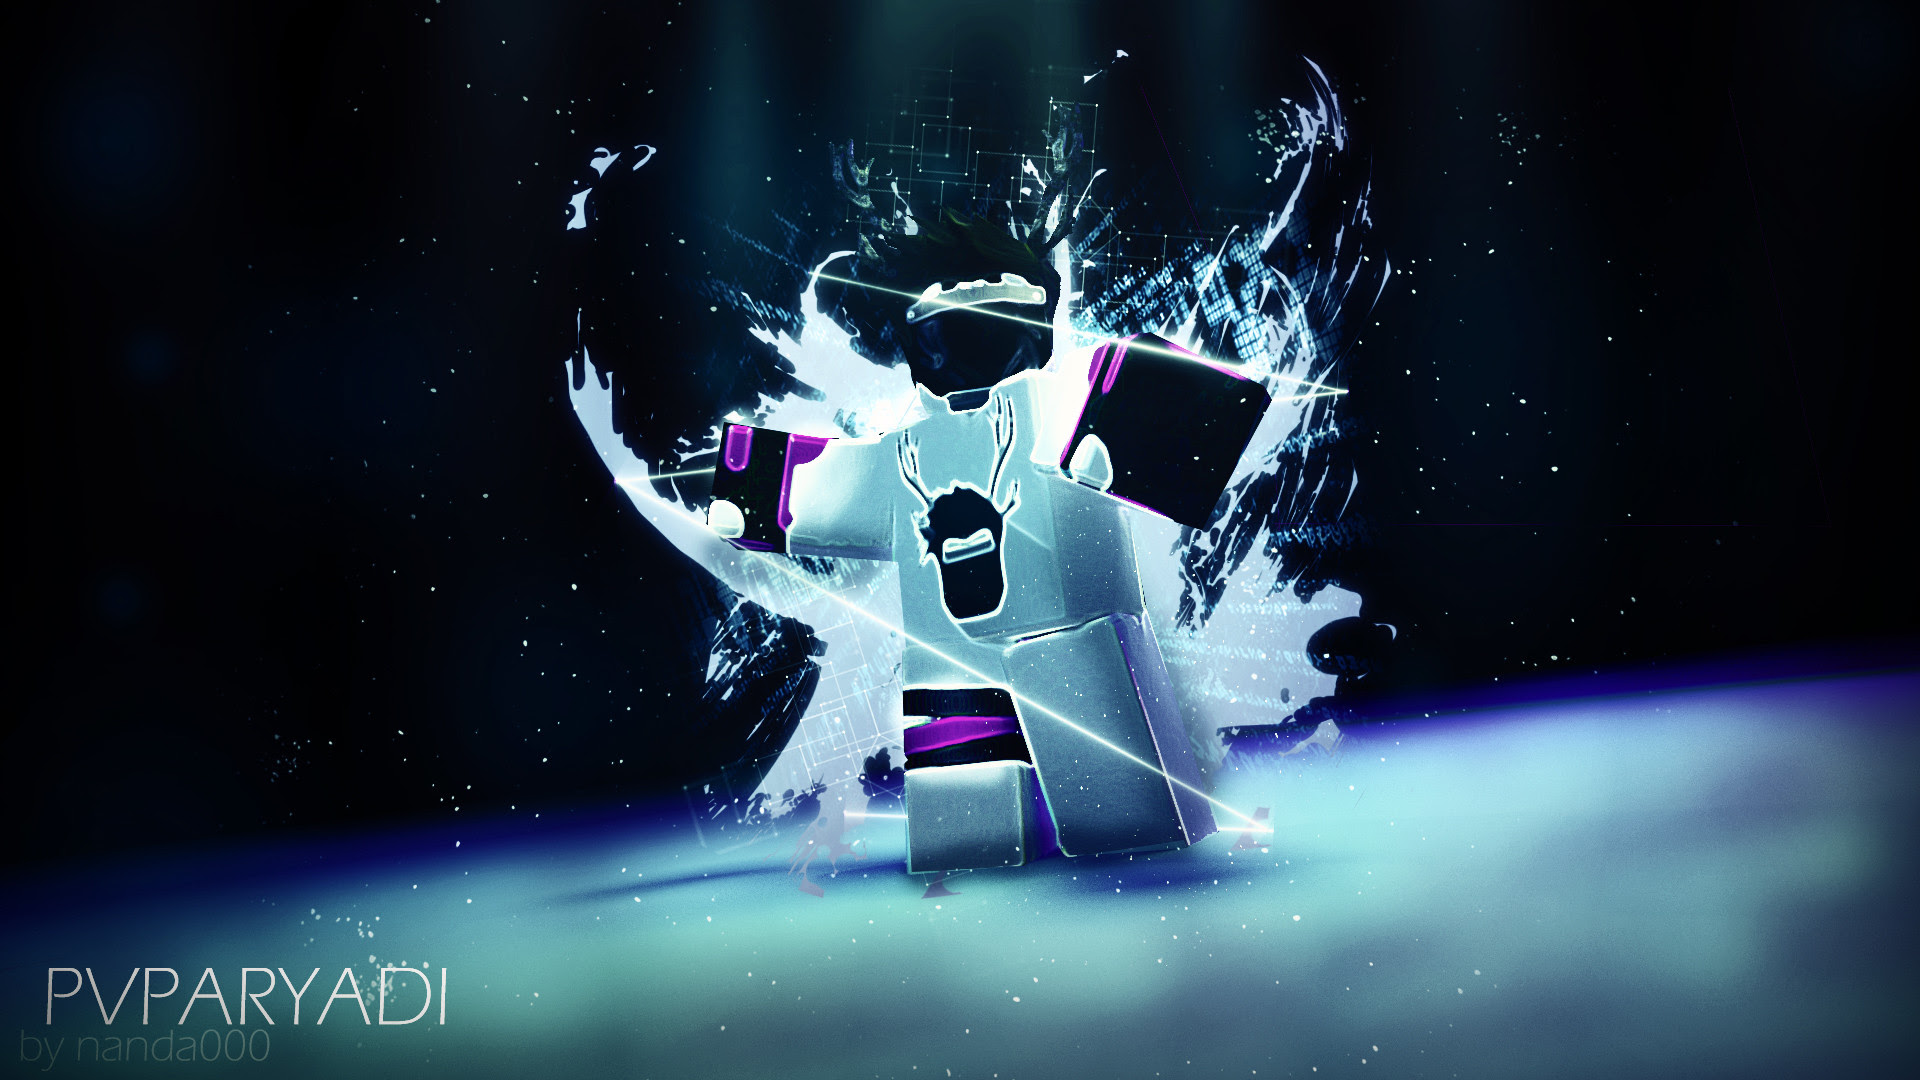 Roblox Background 2560x1440 - 2560x1440 roblox roblox banner template